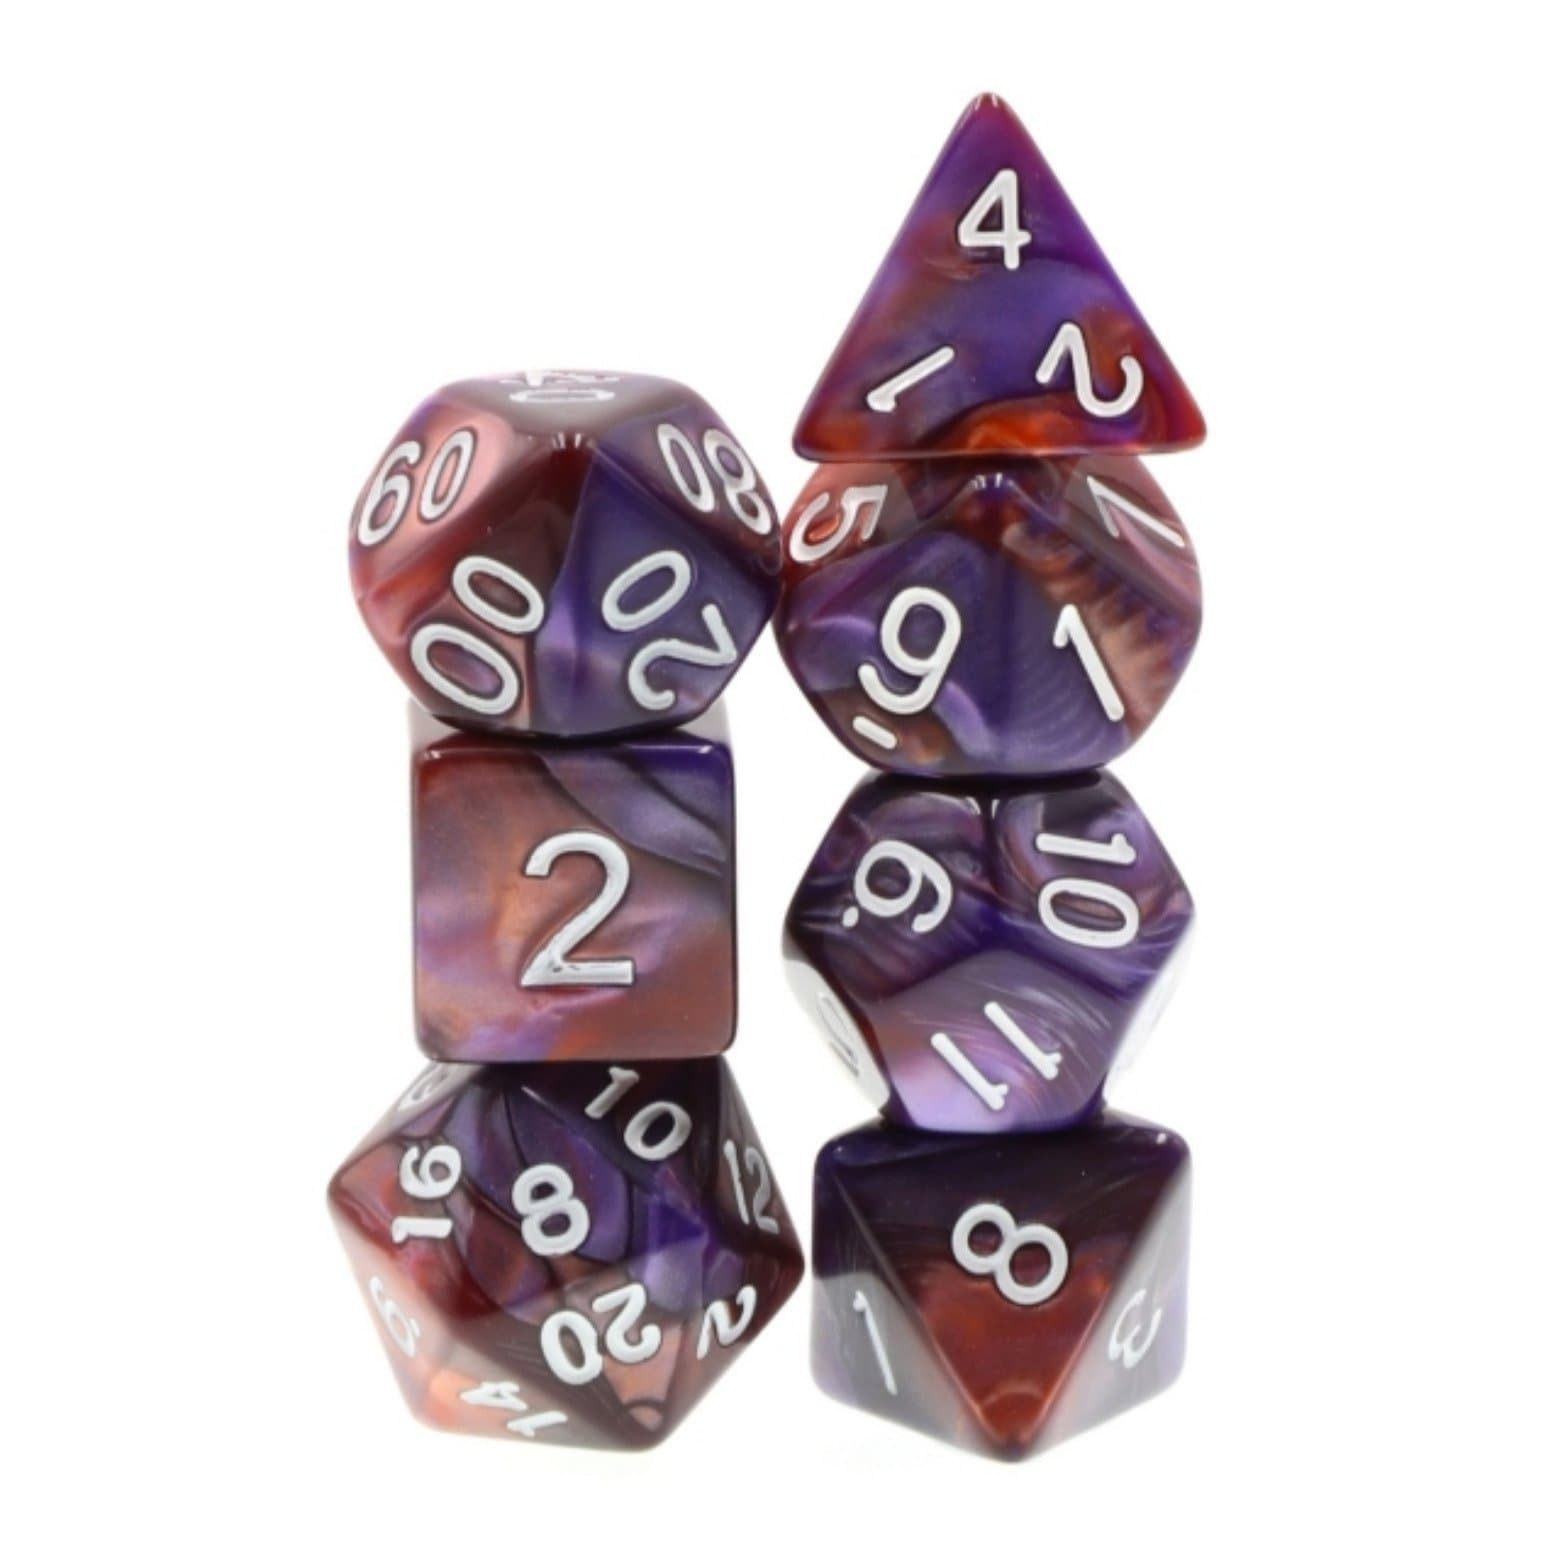 King's Robe RPG Dice Set - Bards & Cards